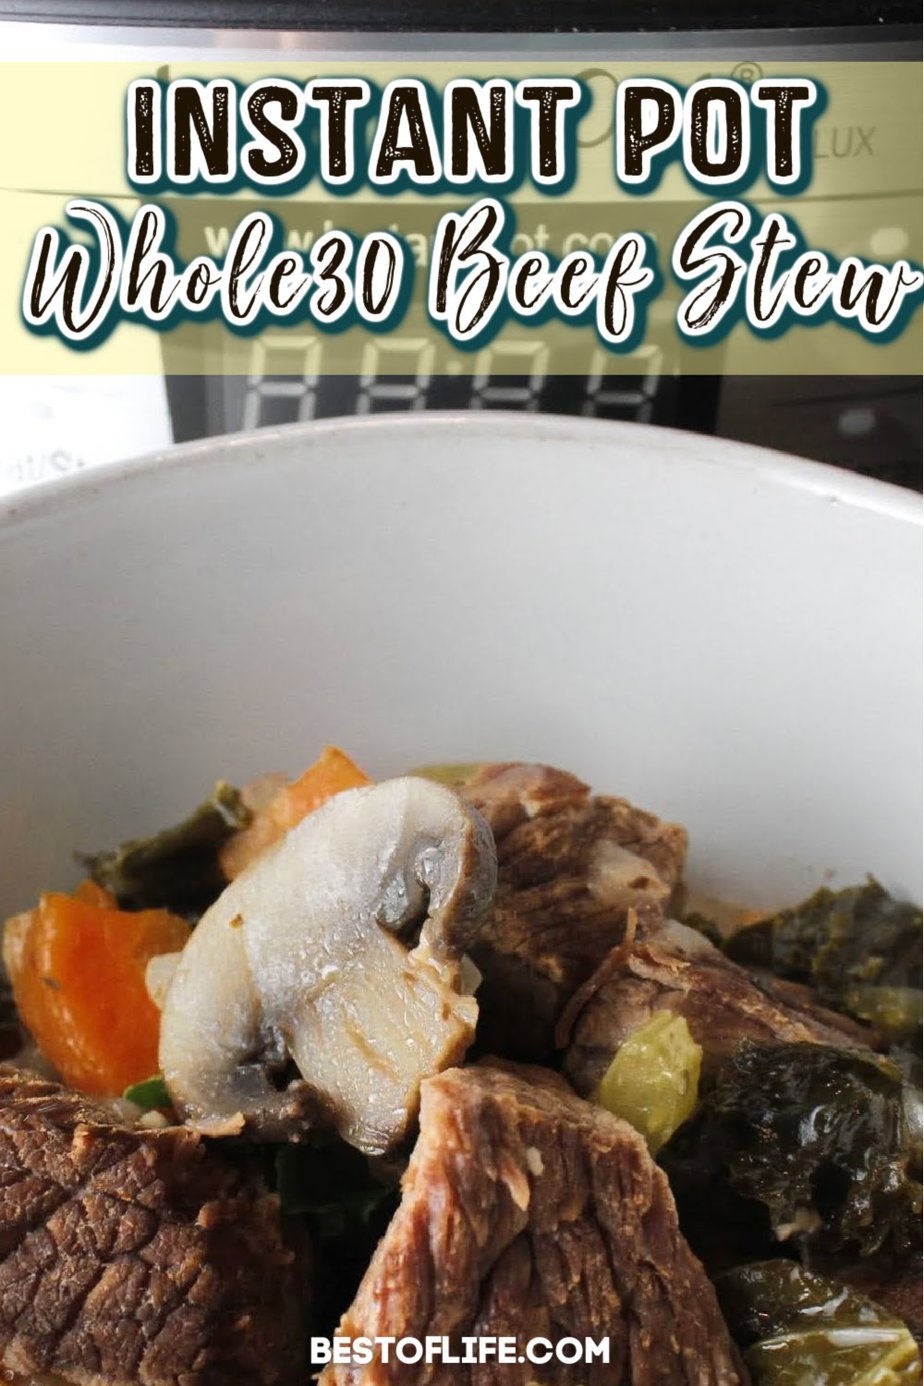 Whole30 Instant Pot beef stew is one a healthy meal that just brings feelings of warmth and comfort. Instant Pot Stew Recipes | Instant Pot Recipes with Beef | Beef Instant Pot Recipe | Instant Pot Soup Recipes | Instant Pot Stew Meat | Stew Meat Recipe | Beef Stew Recipe Pressure Cooker #instantpot #beef